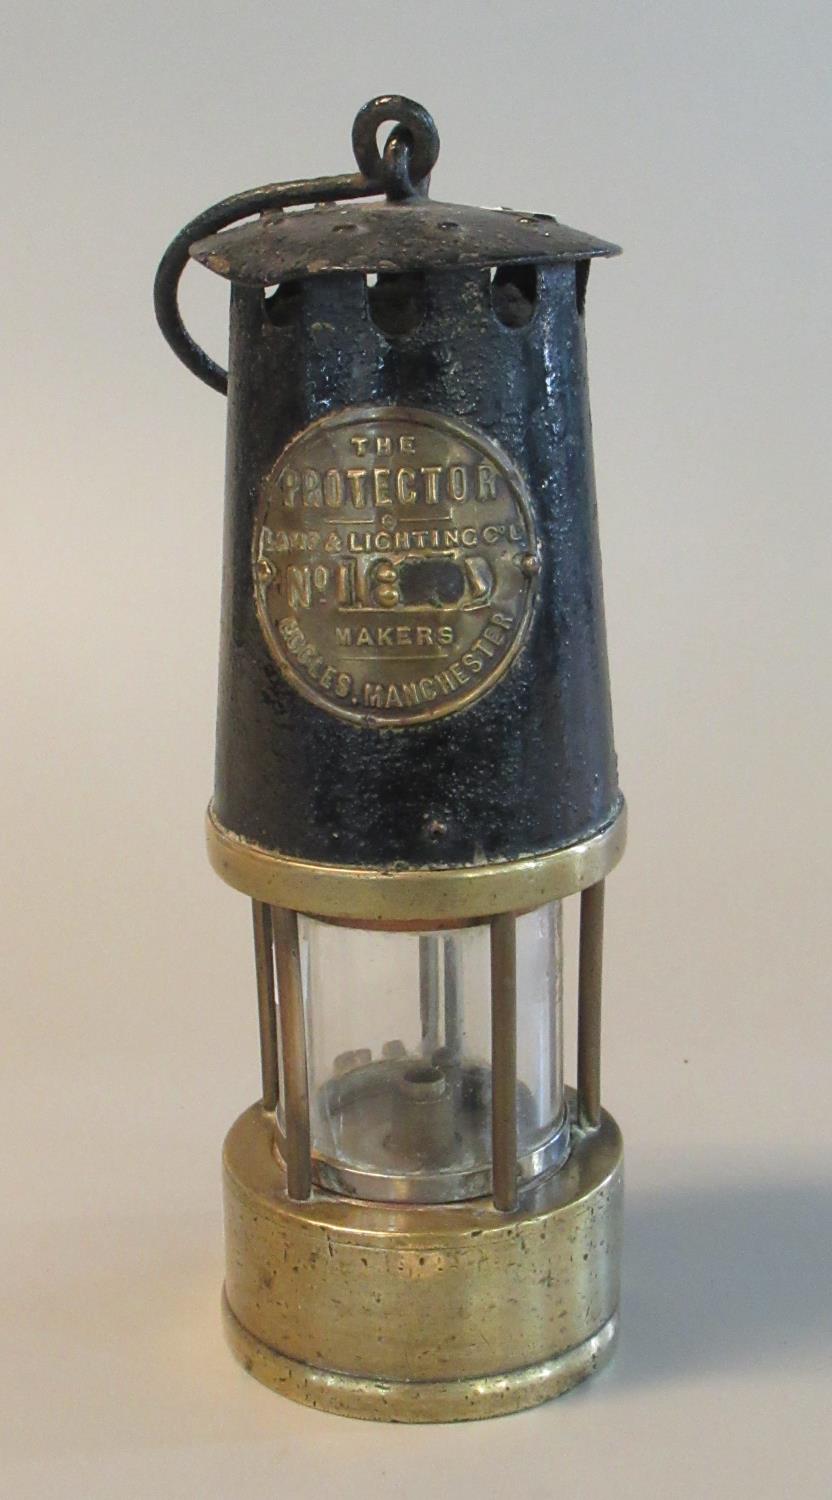 The Protector Lamp & Lighting co. of Eccles, Manchester brass miners safety lamp in used